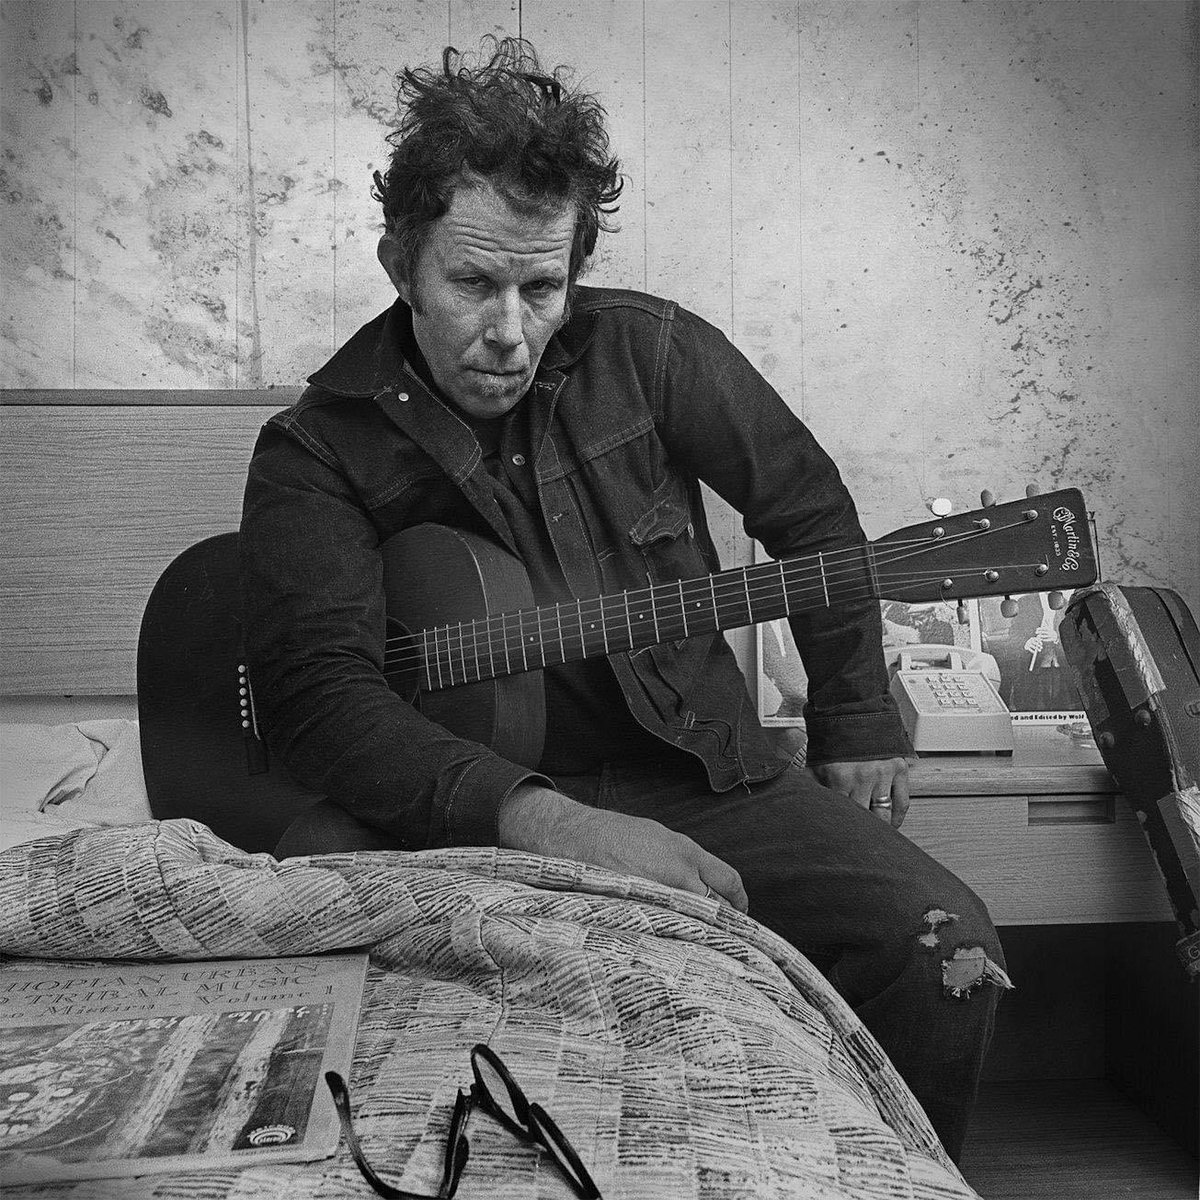 “Don't plant your bad days. They grow into weeks. The weeks grow into months. Before you know it, you got yourself a bad year. Take it from me - choke those little bad days. Choke 'em down to nothing.” ~ Tom Waits